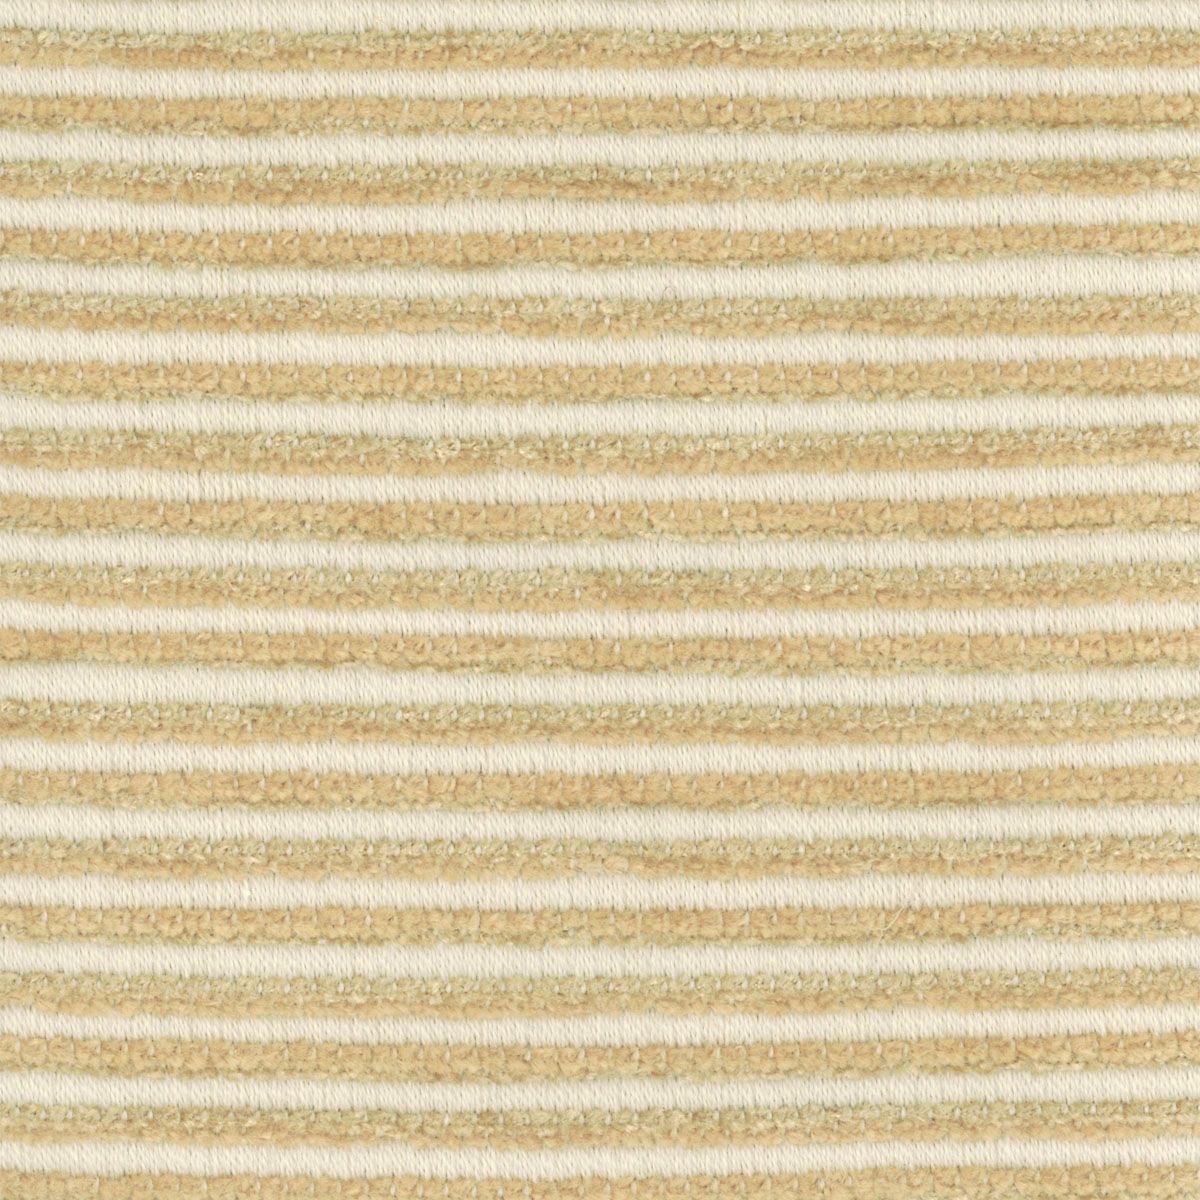 Cimmeria fabric in desert color - pattern number WC 0005U32A - by Scalamandre in the Old World Weavers collection